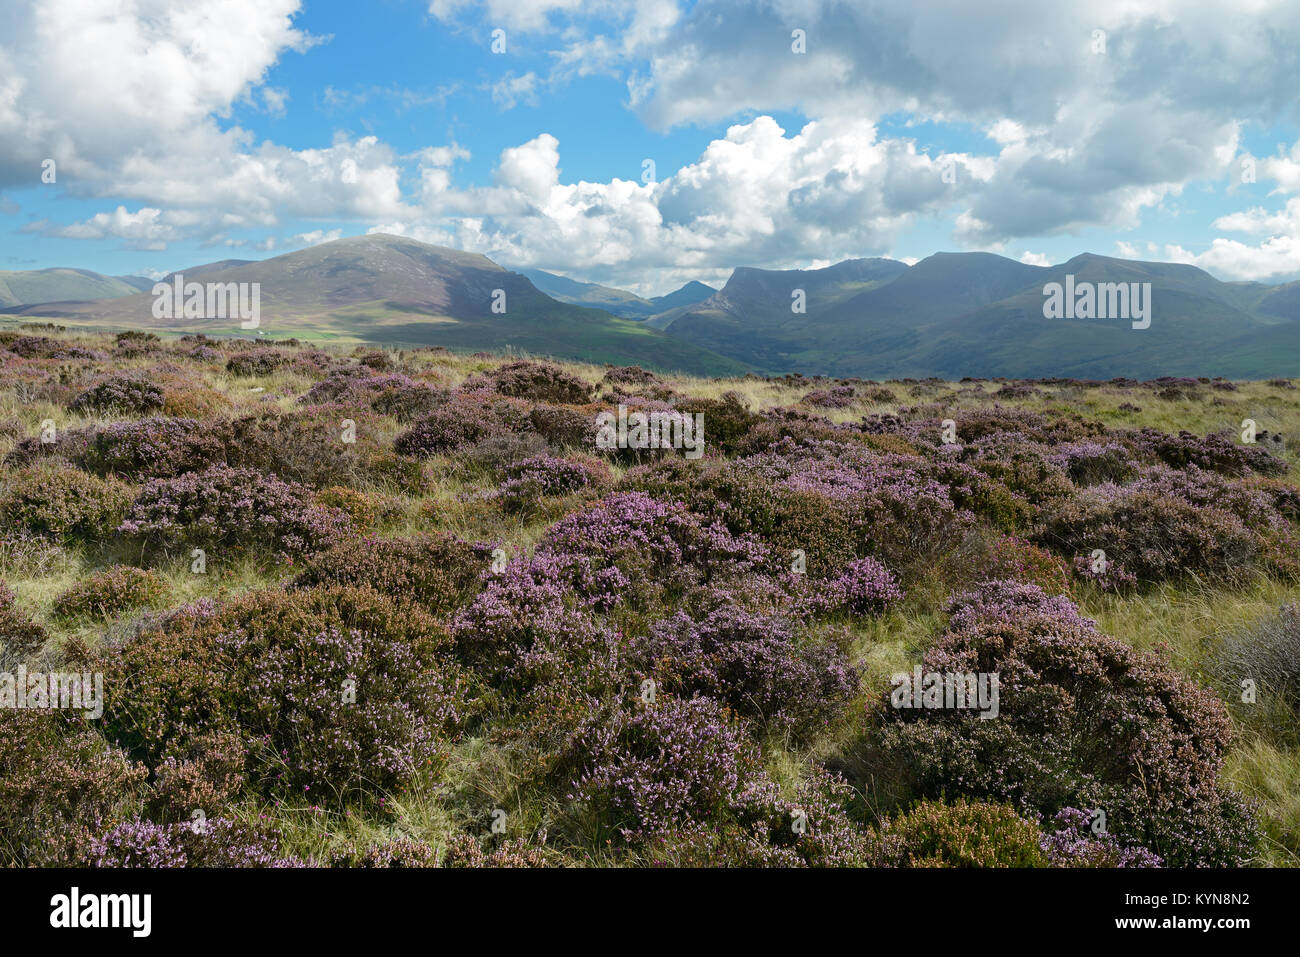 Mountain heath, dominated by small shrubs with evergreen leaves, is here located on Mynydd y Cilgwyn in the Snowdonia National Park (Wales). Stock Photo